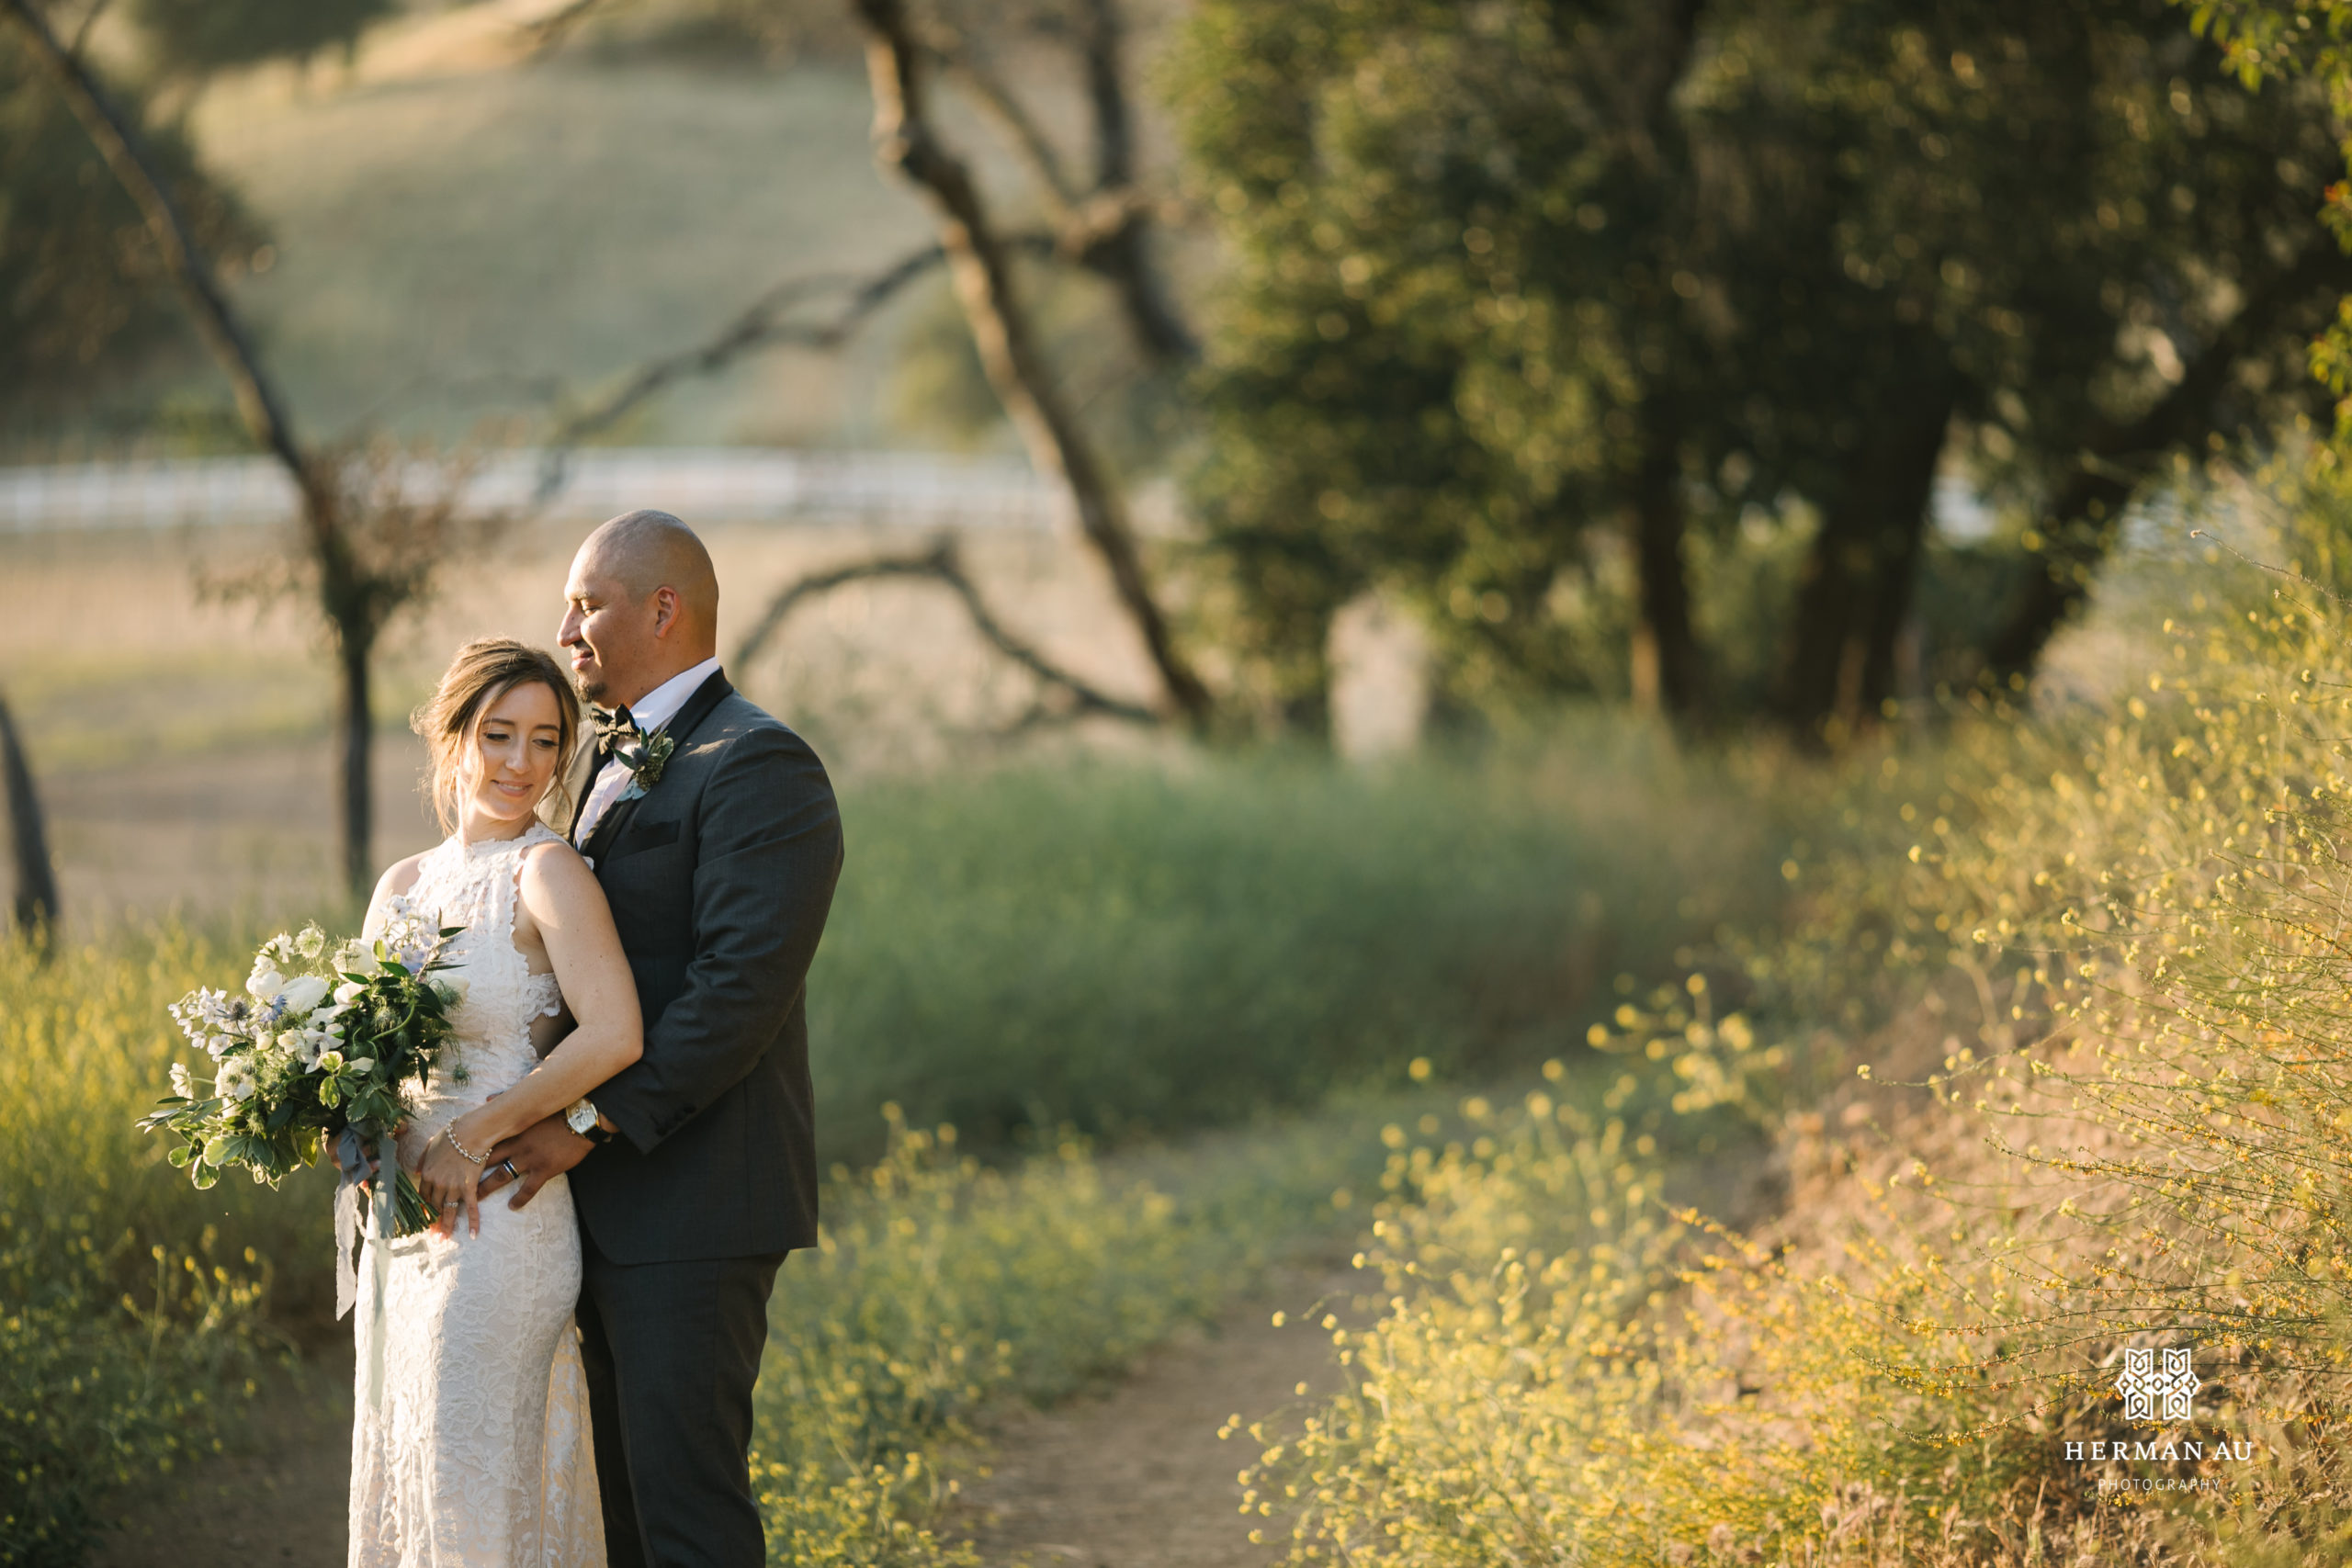 bride in high neckline open back lace wedding dress and groom in dark grey suit and black bowtie take photos in vineyard at Saddlerock Ranch